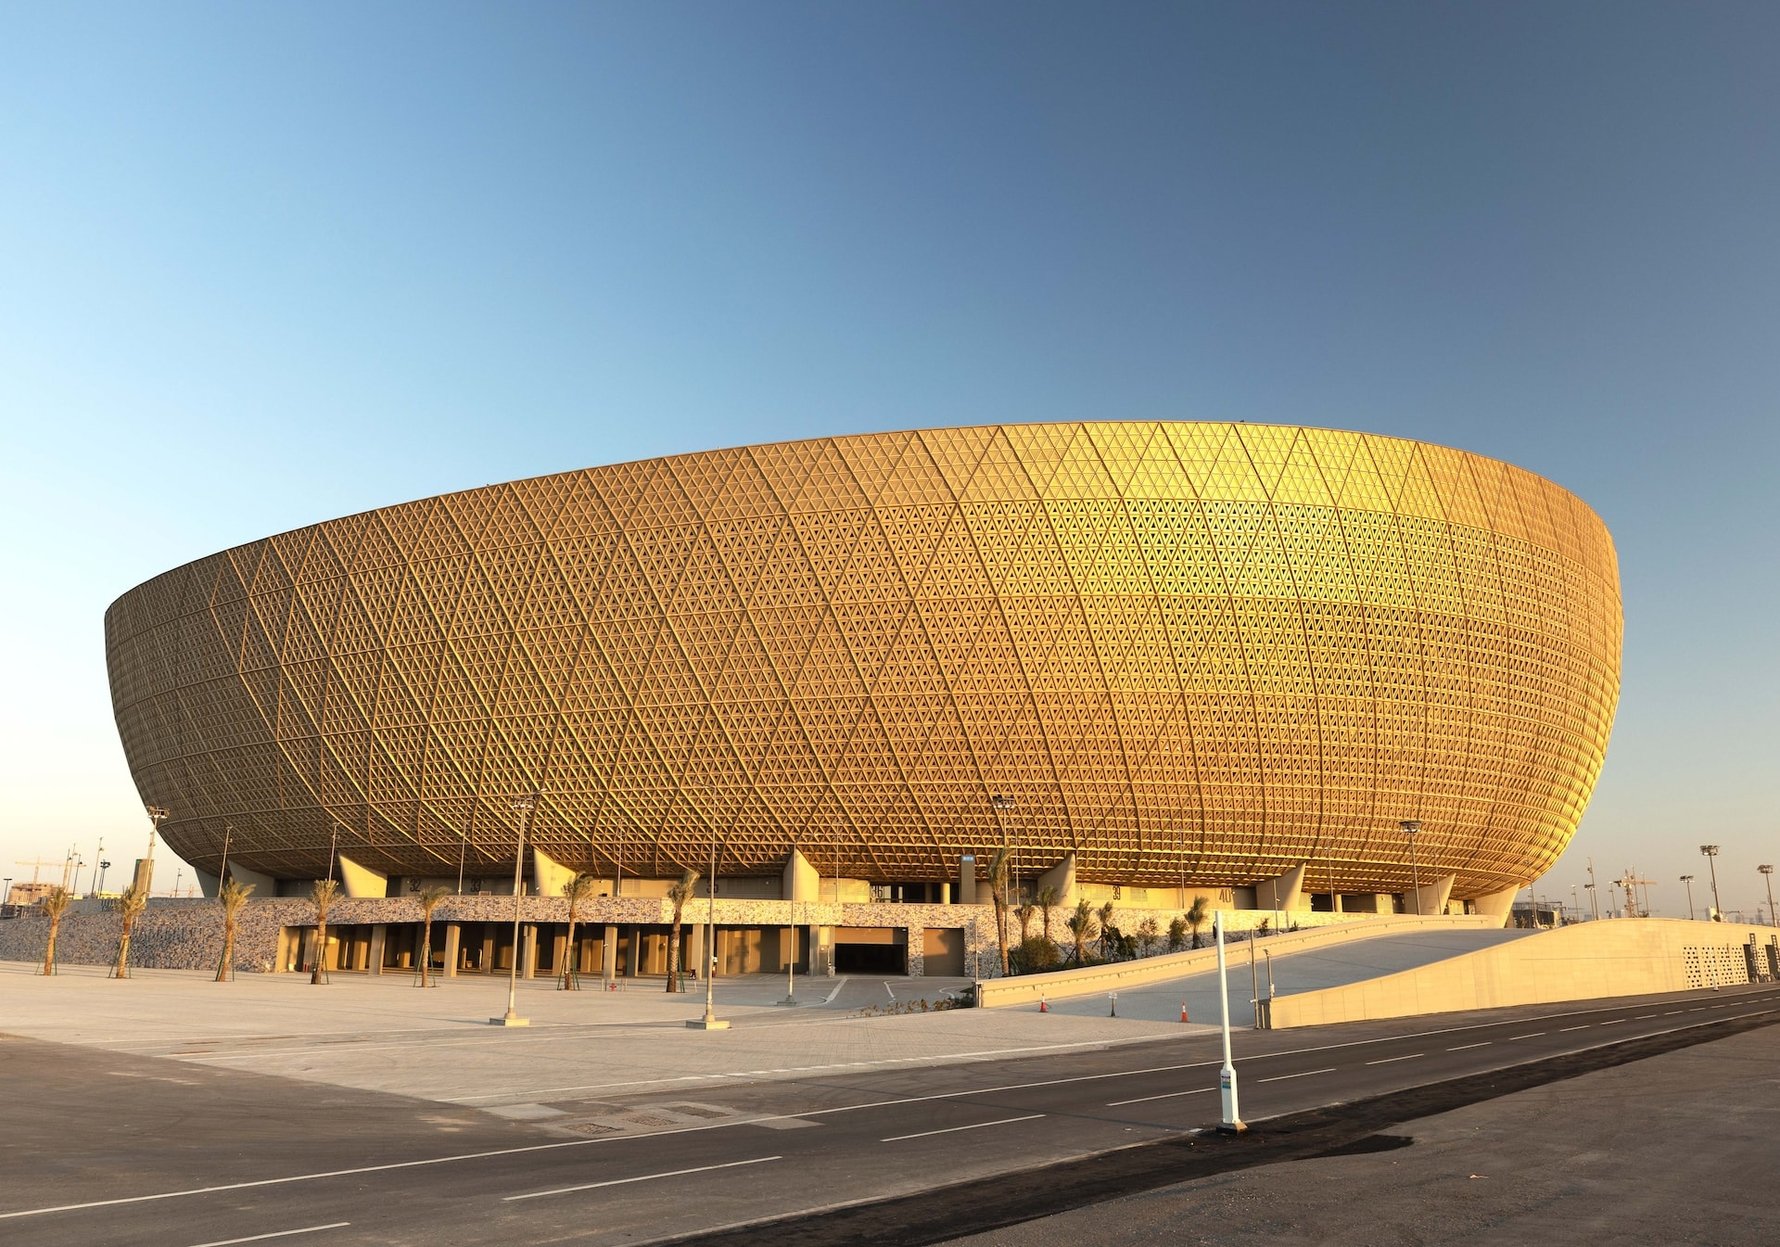 Things to know about Qatar ahead of the 2022 World Cup © visit-qatar-unsplash